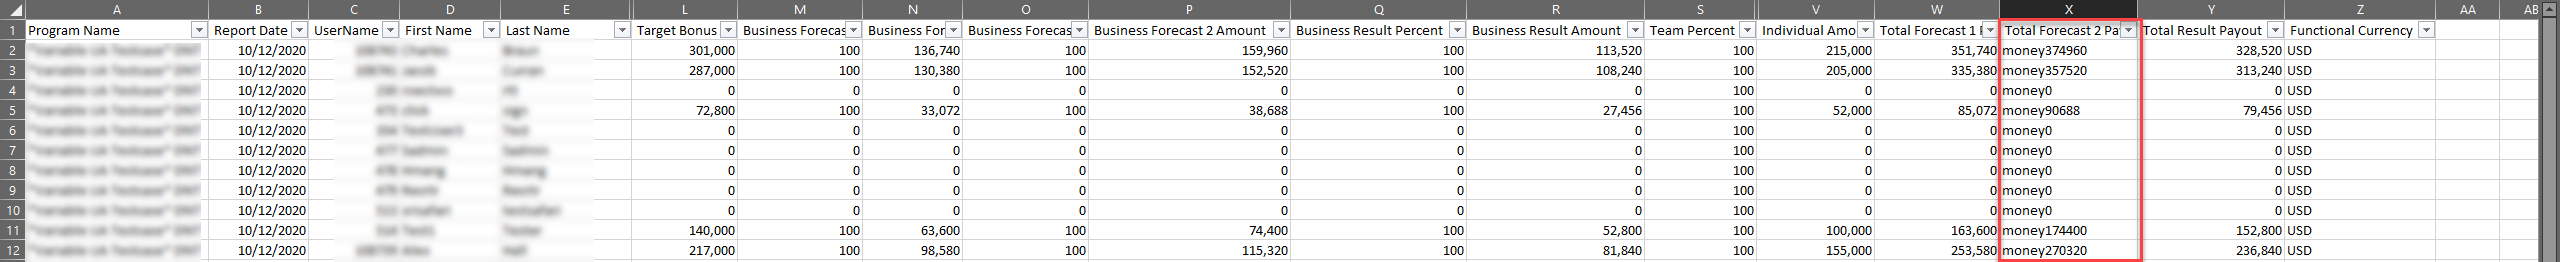 string values in forecasting report.png